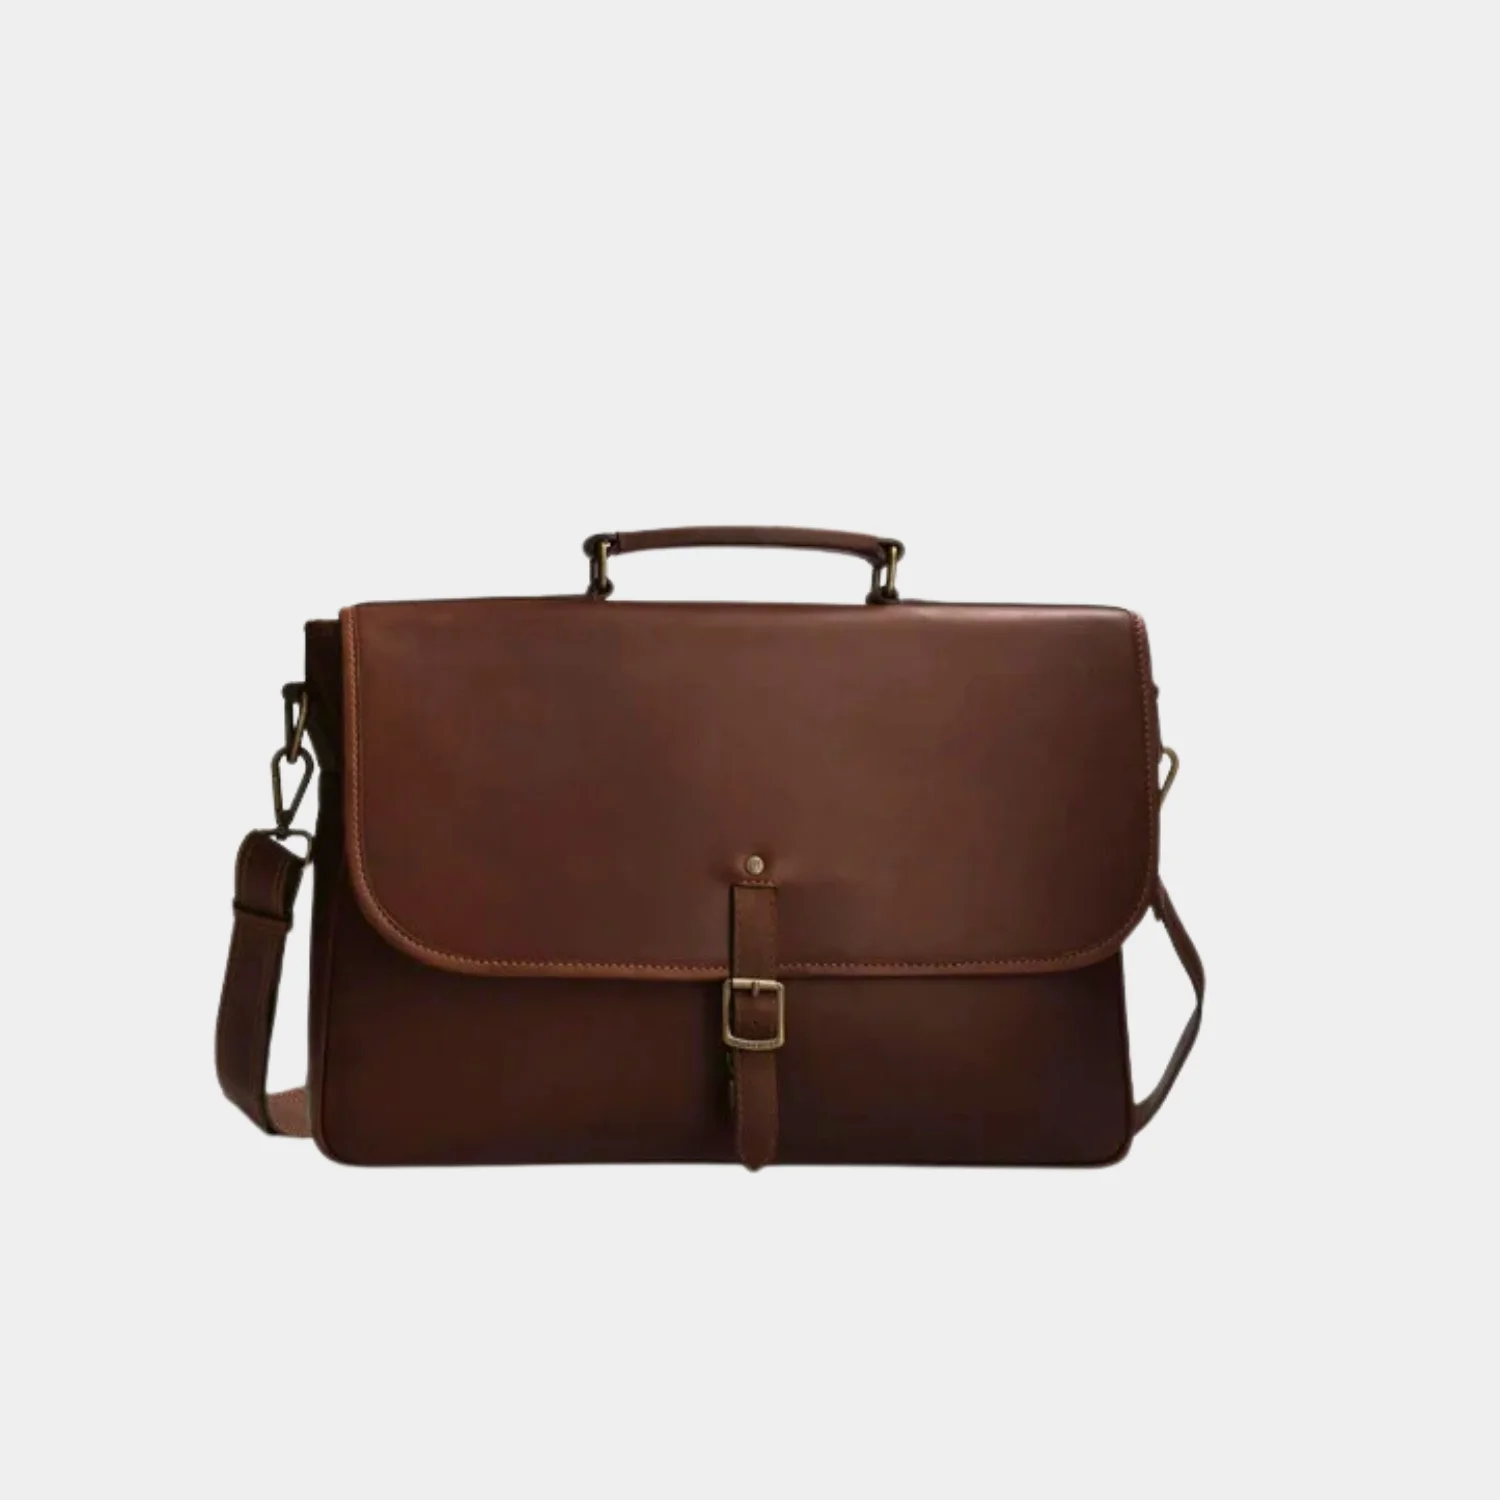 Buy Classy Dark Brown Leather 17 Inches Laptop Messenger Briefcase Bag